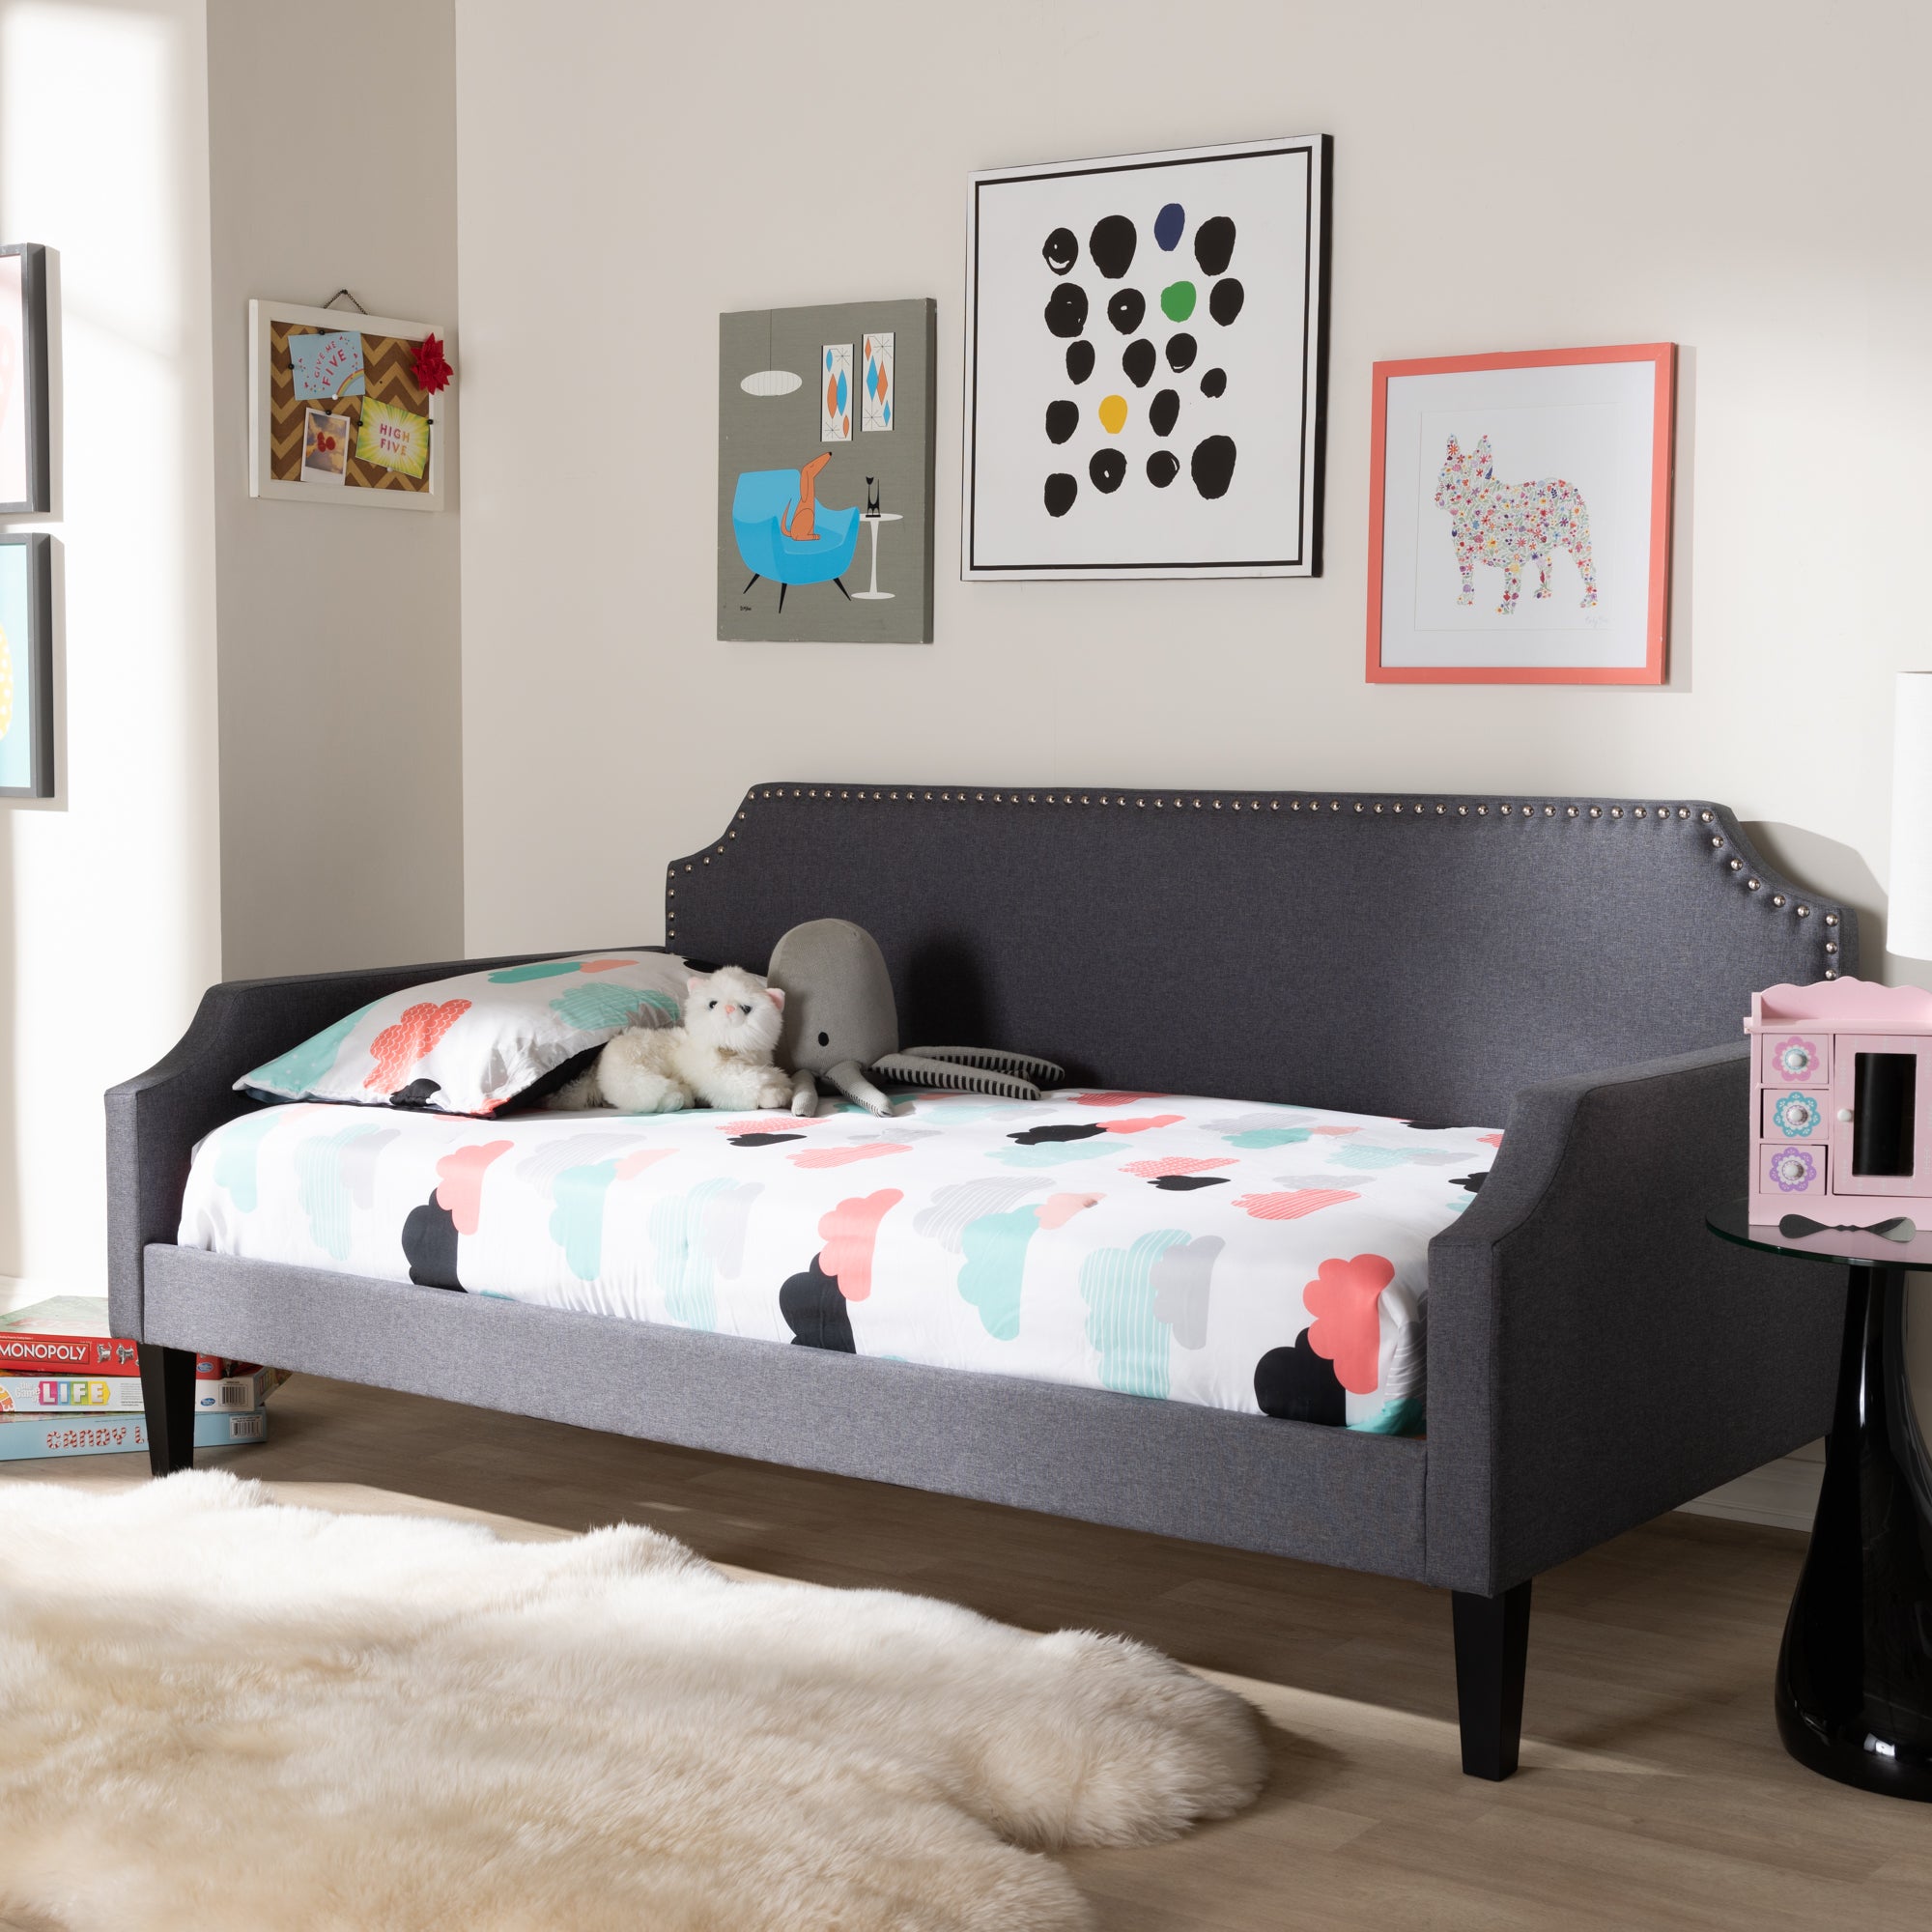 Walden Contemporary Daybed-Daybed-Baxton Studio - WI-Wall2Wall Furnishings